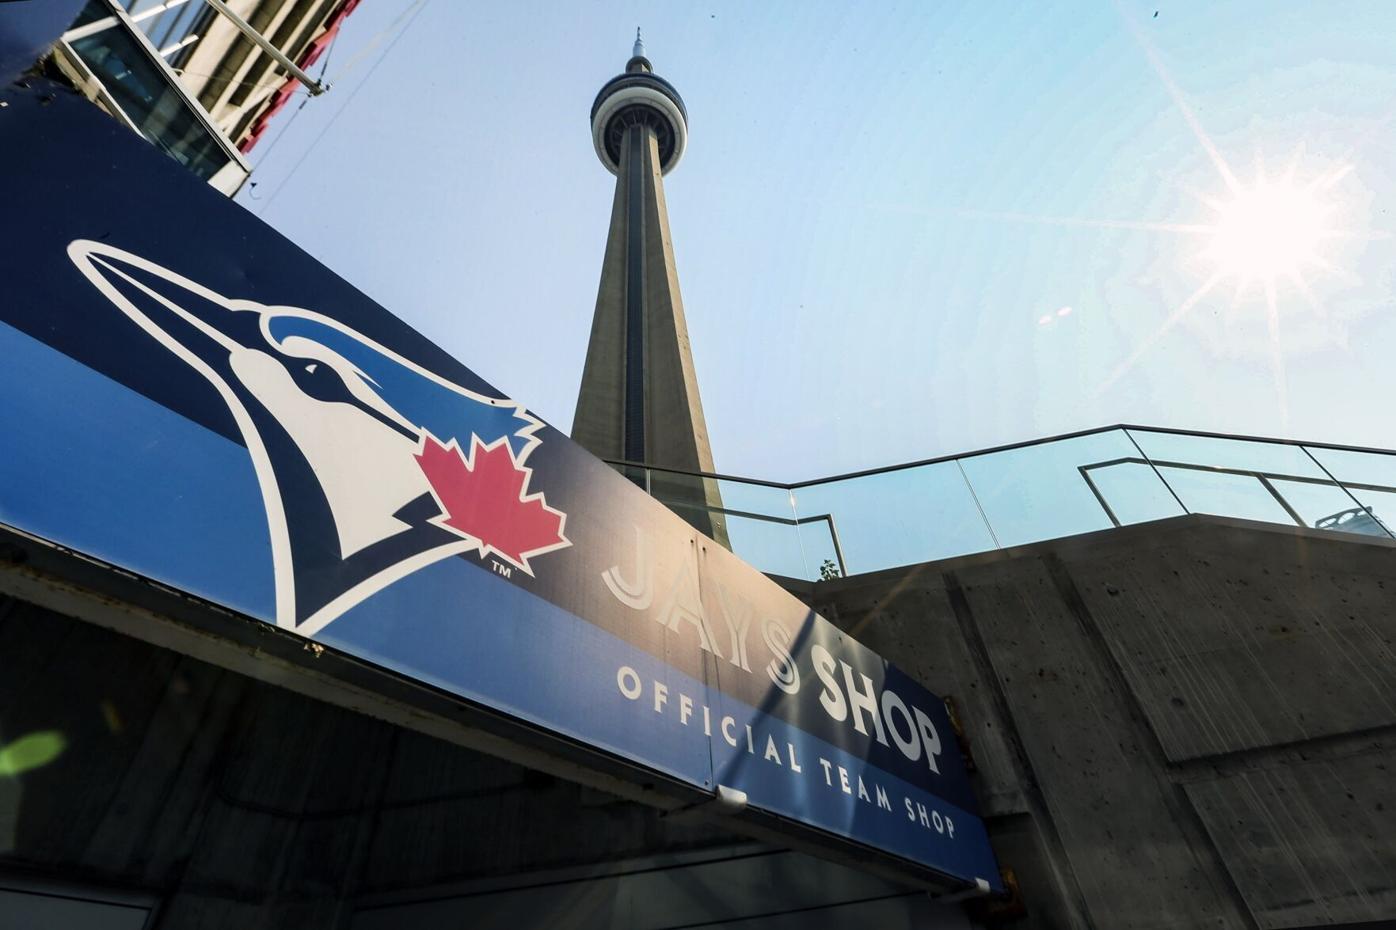 Police warn of road closures around Rogers Centre as Toronto Blue